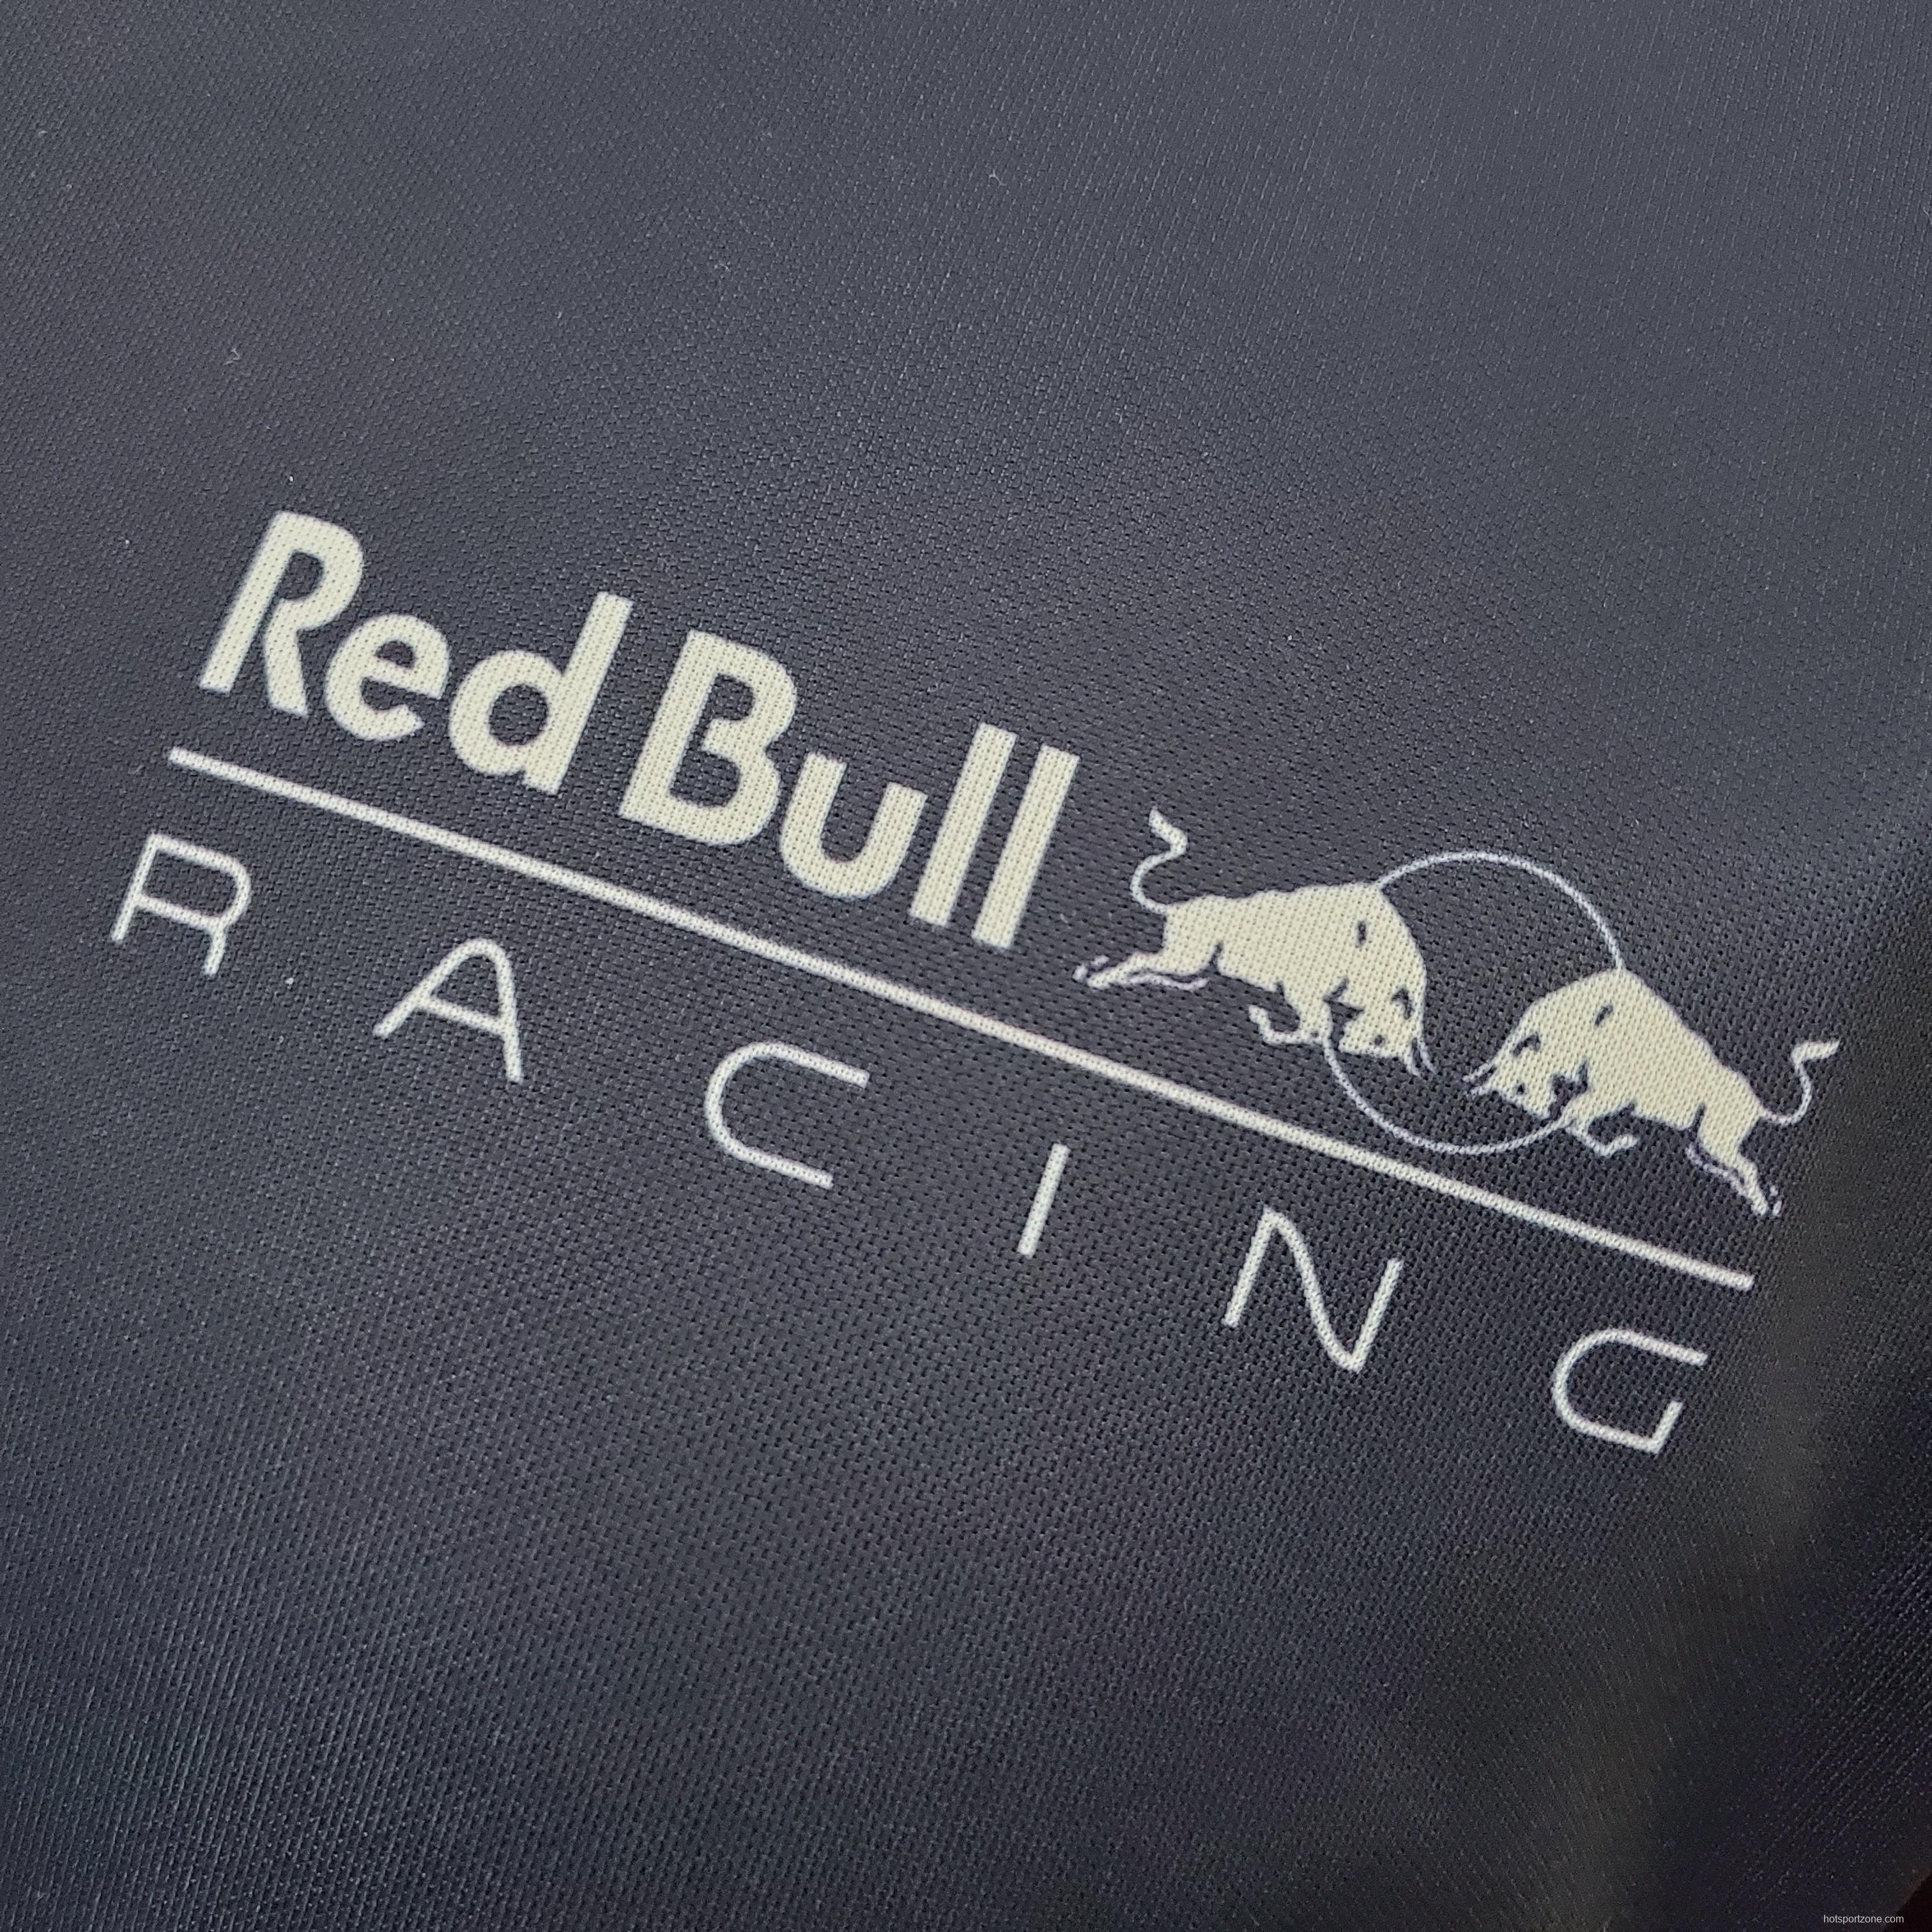 F1 Formula One racing suit 2021 Red Bull T-shirt s-5xl